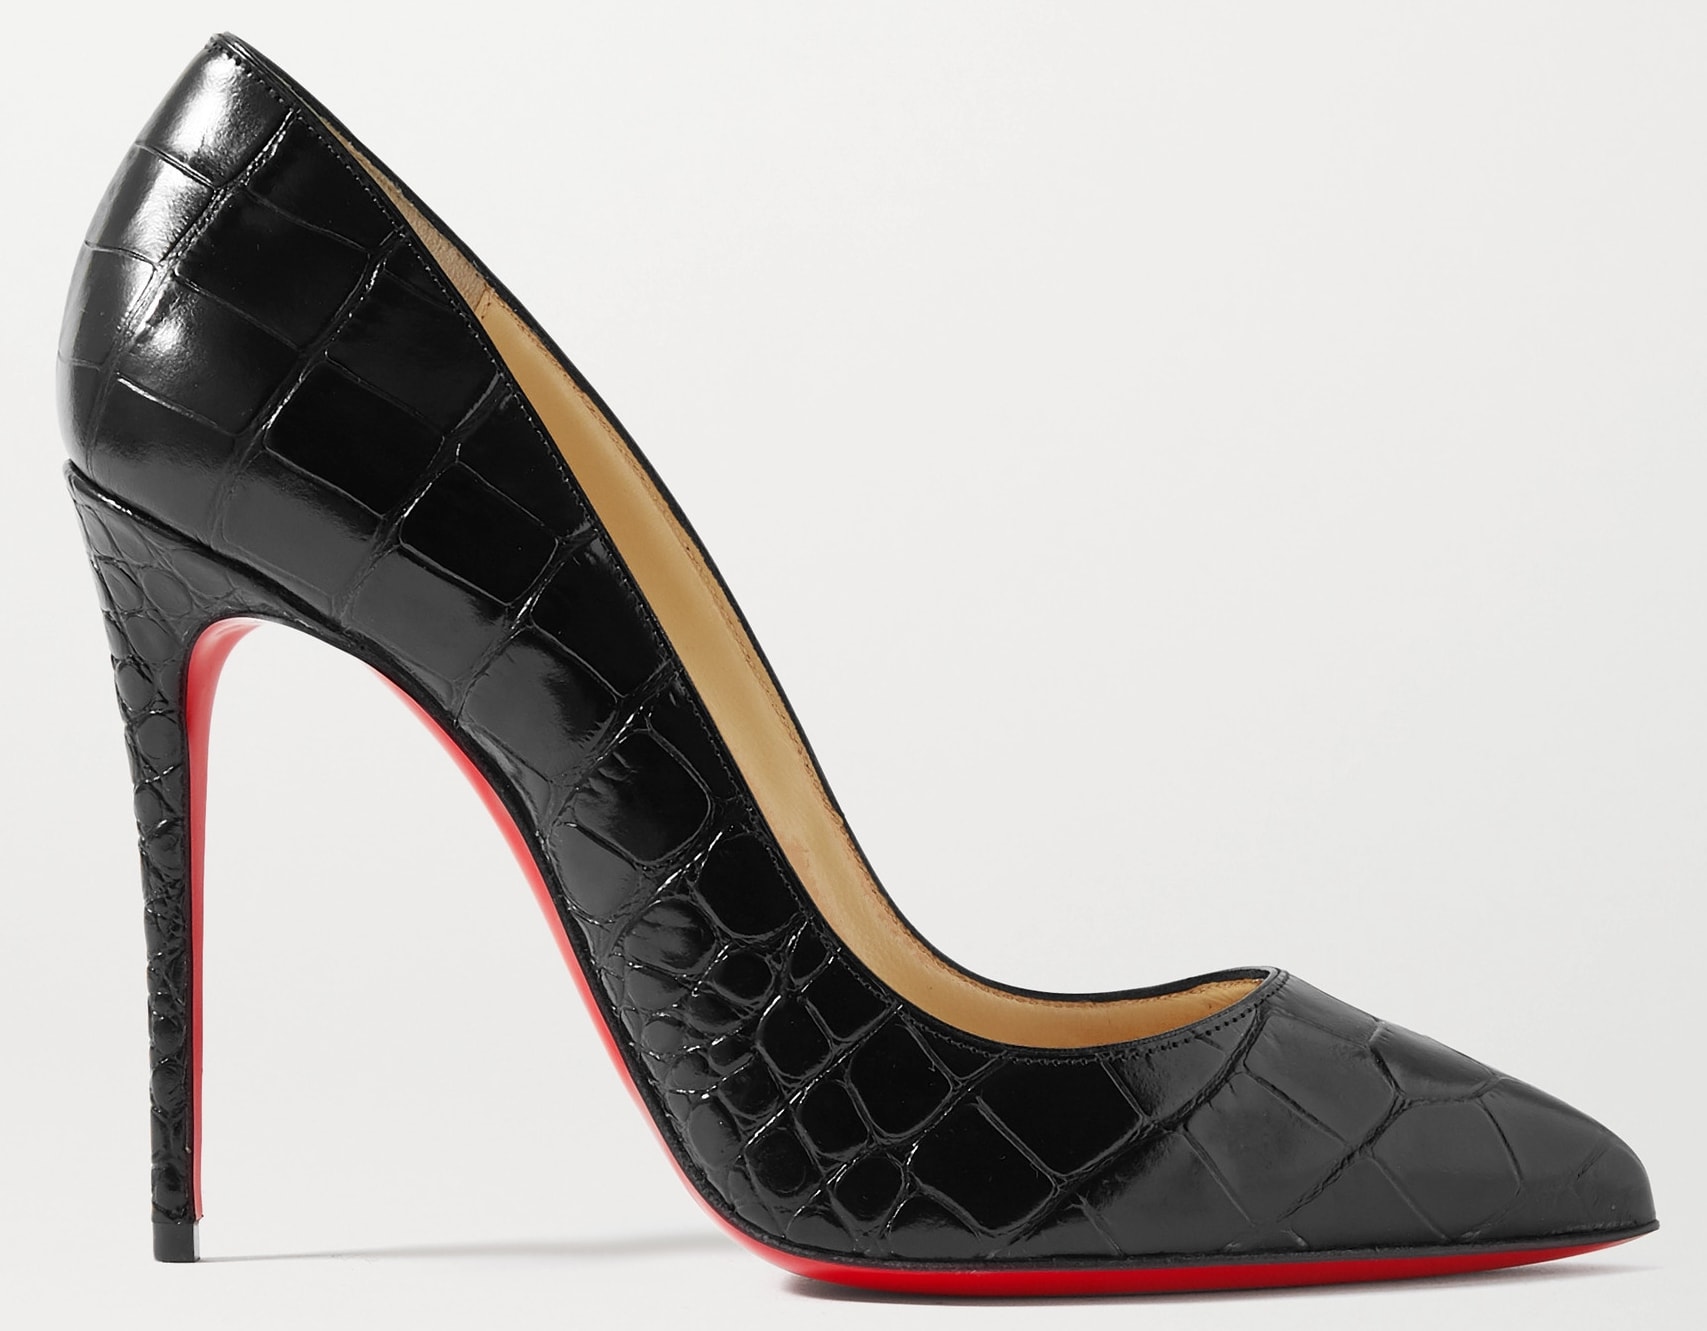 Christian Louboutin's Pigalle Follies pumps are crafted in Italy from croc-effect leather and feature pointed toes and slim 4-inch heels